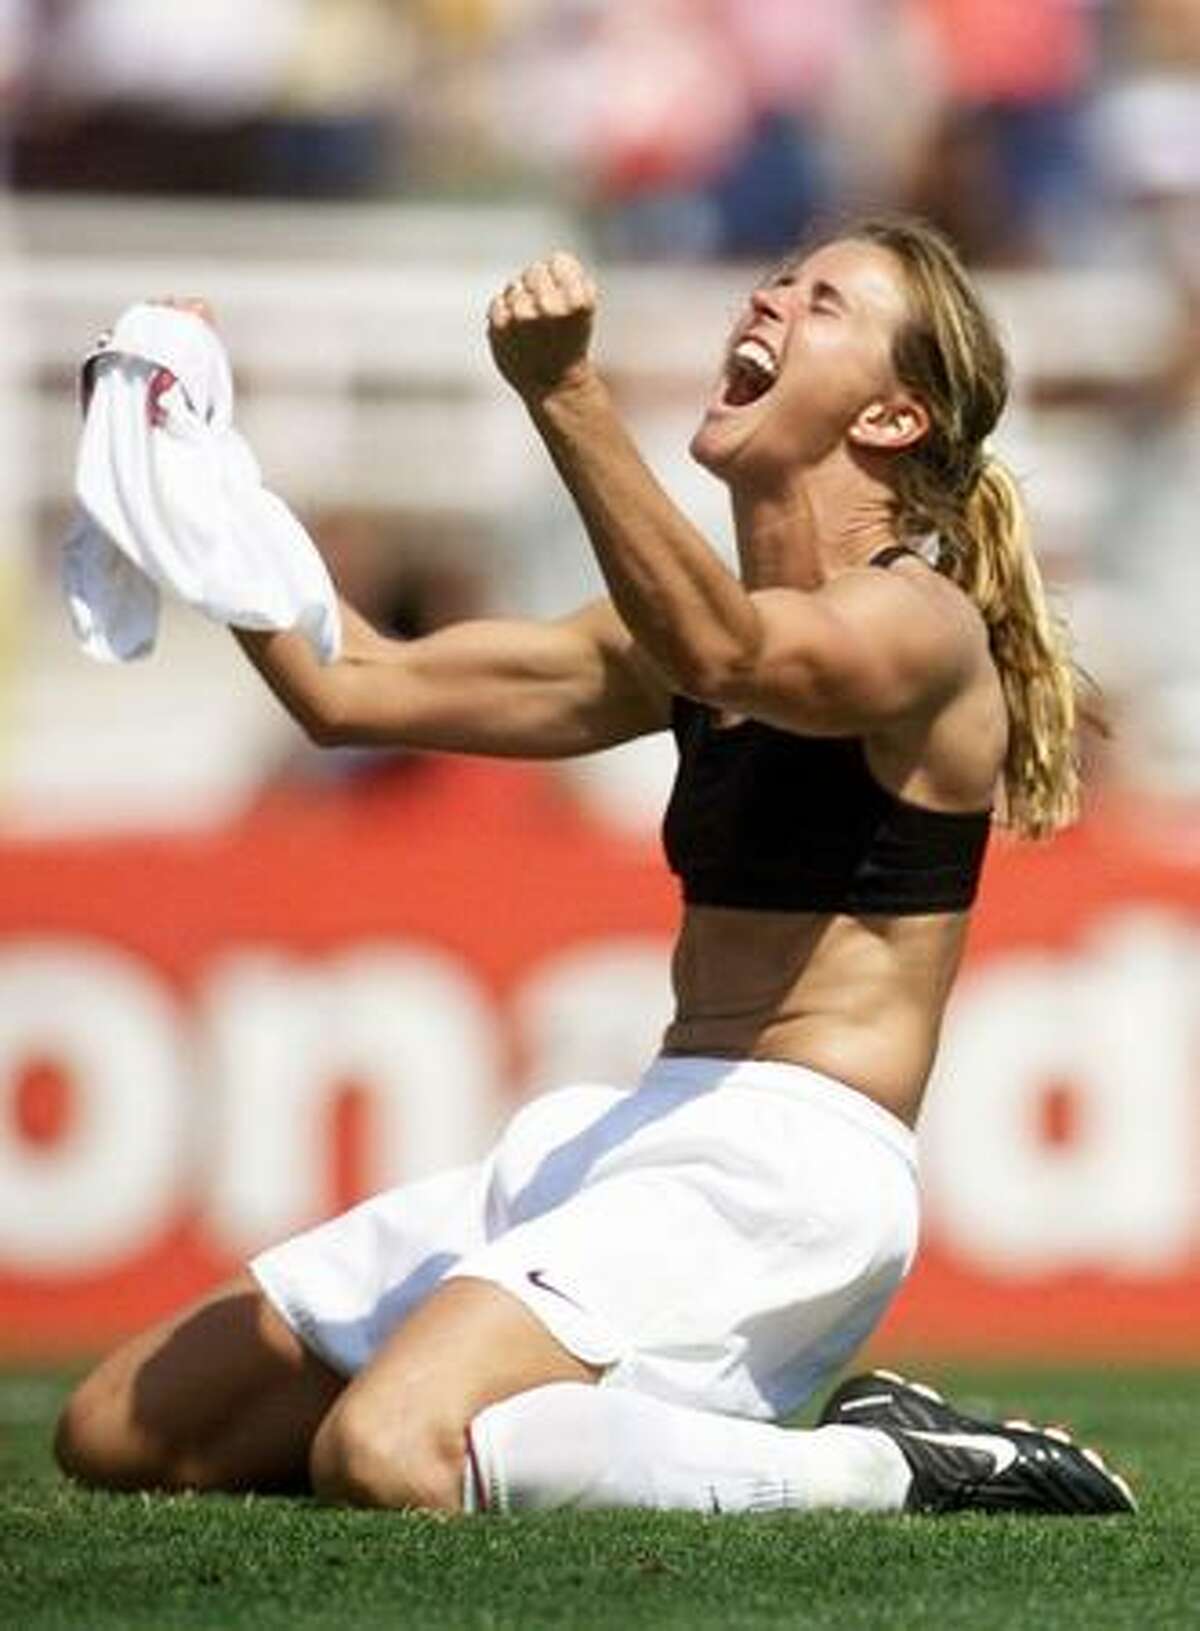 In this July 10, 1999 file photo, Brandi Chastain of the United States celebrates after kicking the winning penalty shot to win the 1999 Women's World Cup final against China at the Rose Bowl in Pasadena, Calif. (Photo by Roberto Schmidt/AFP/Getty Images)